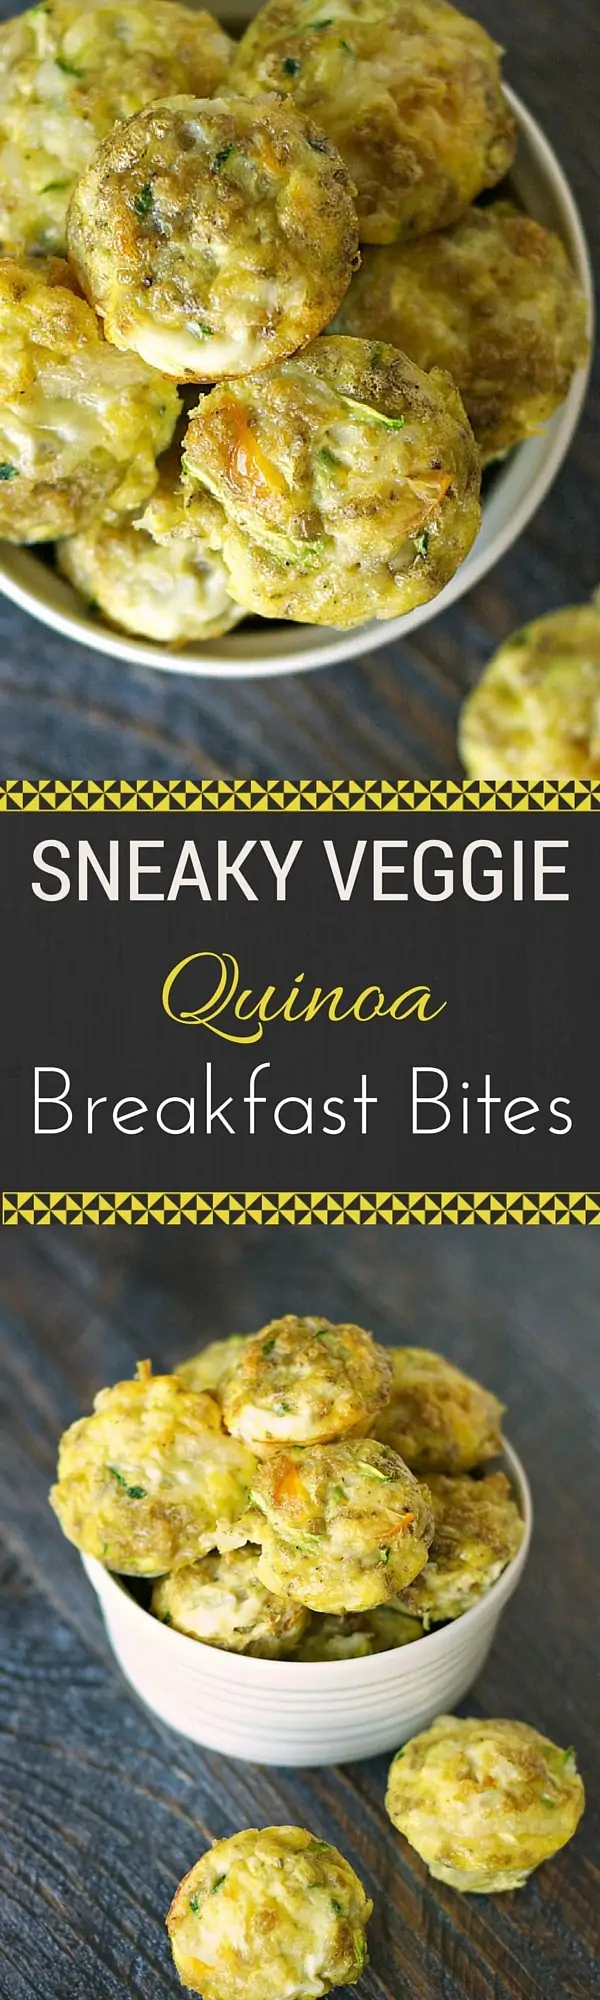 Sneaky Veggie Quinoa Breakfast Bites - This easy breakfast recipe is healthy and delicious. A great way to get quinoa in kids!